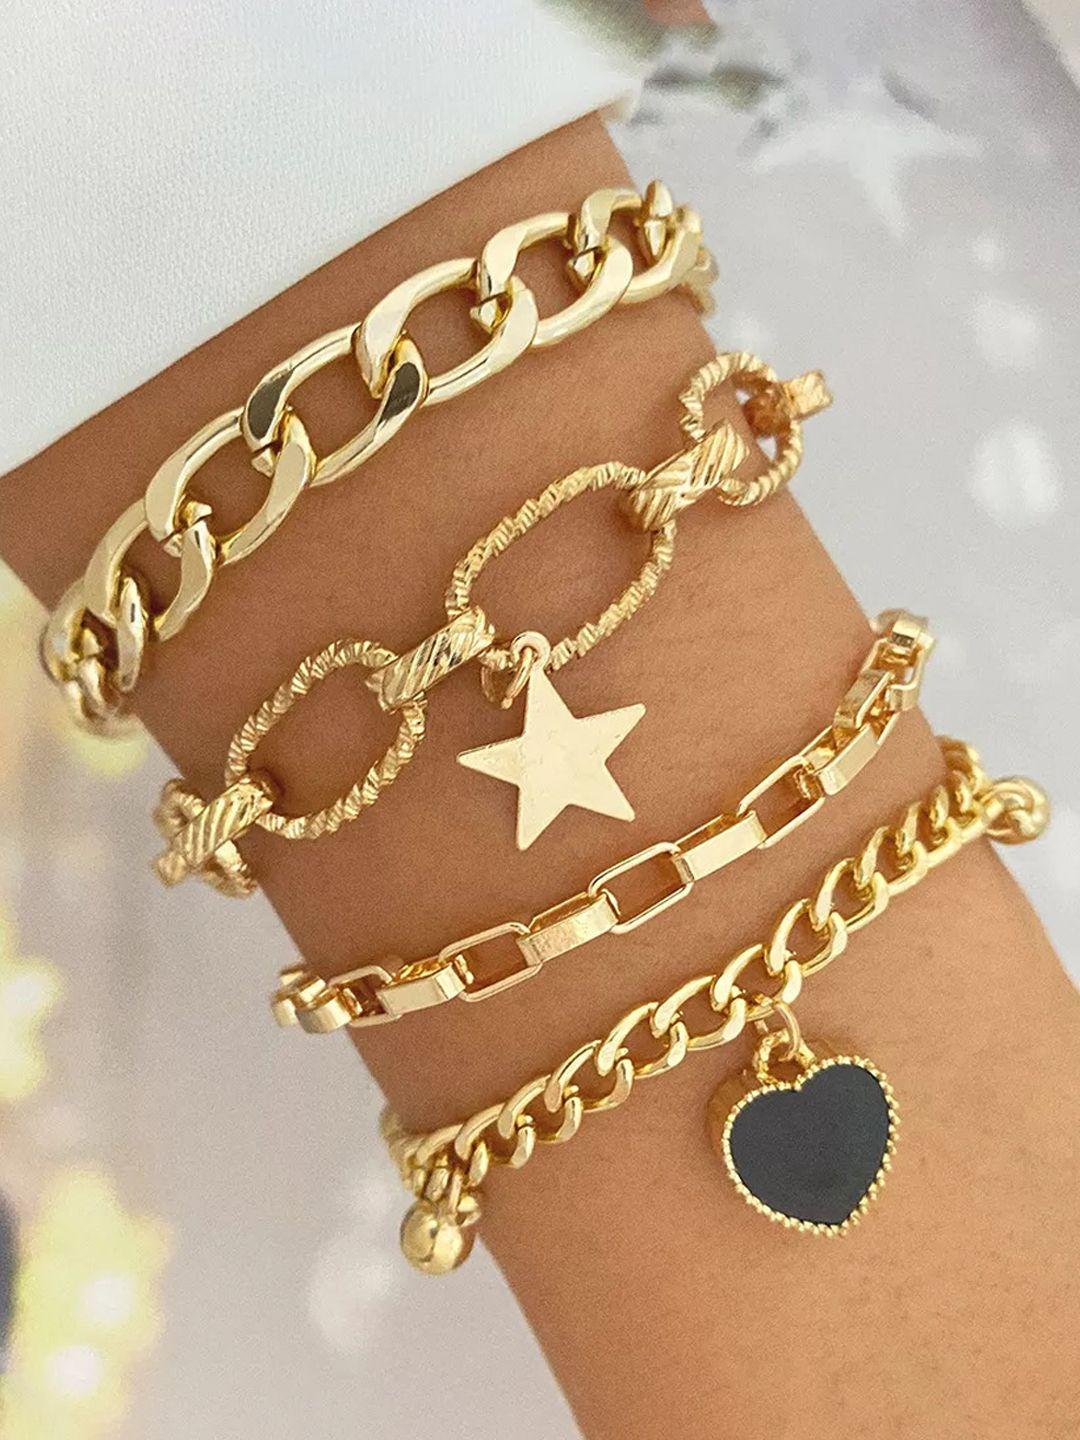 jewels-galaxy-women-4-gold-toned-gold-plated-link-bracelet